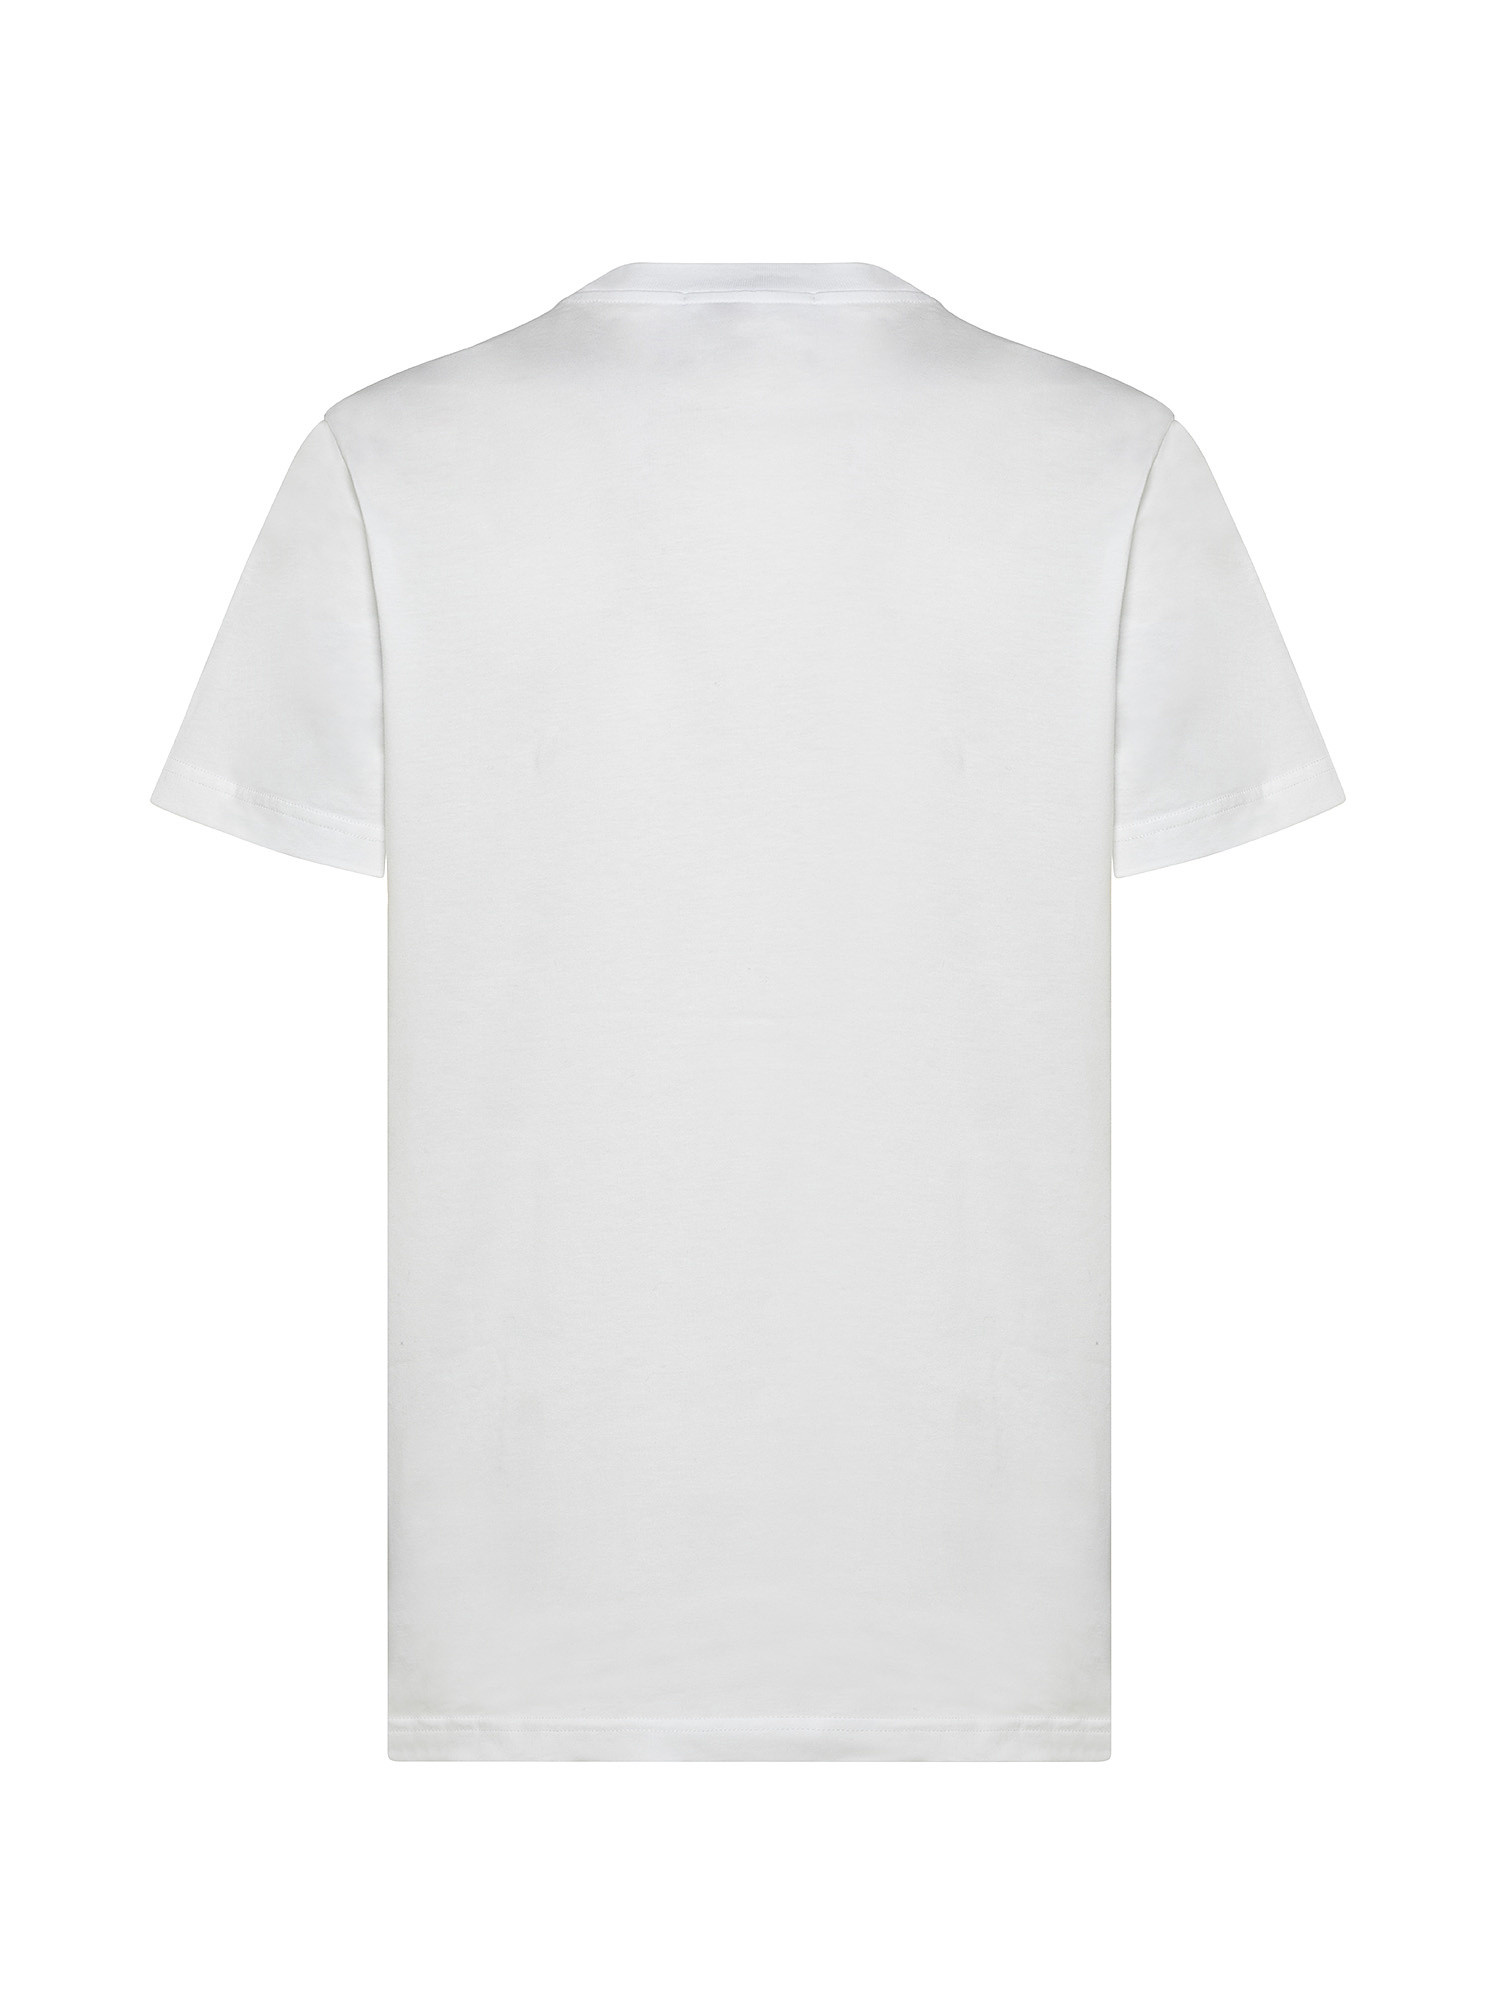 Cotton T-shirt with logo, White, large image number 1